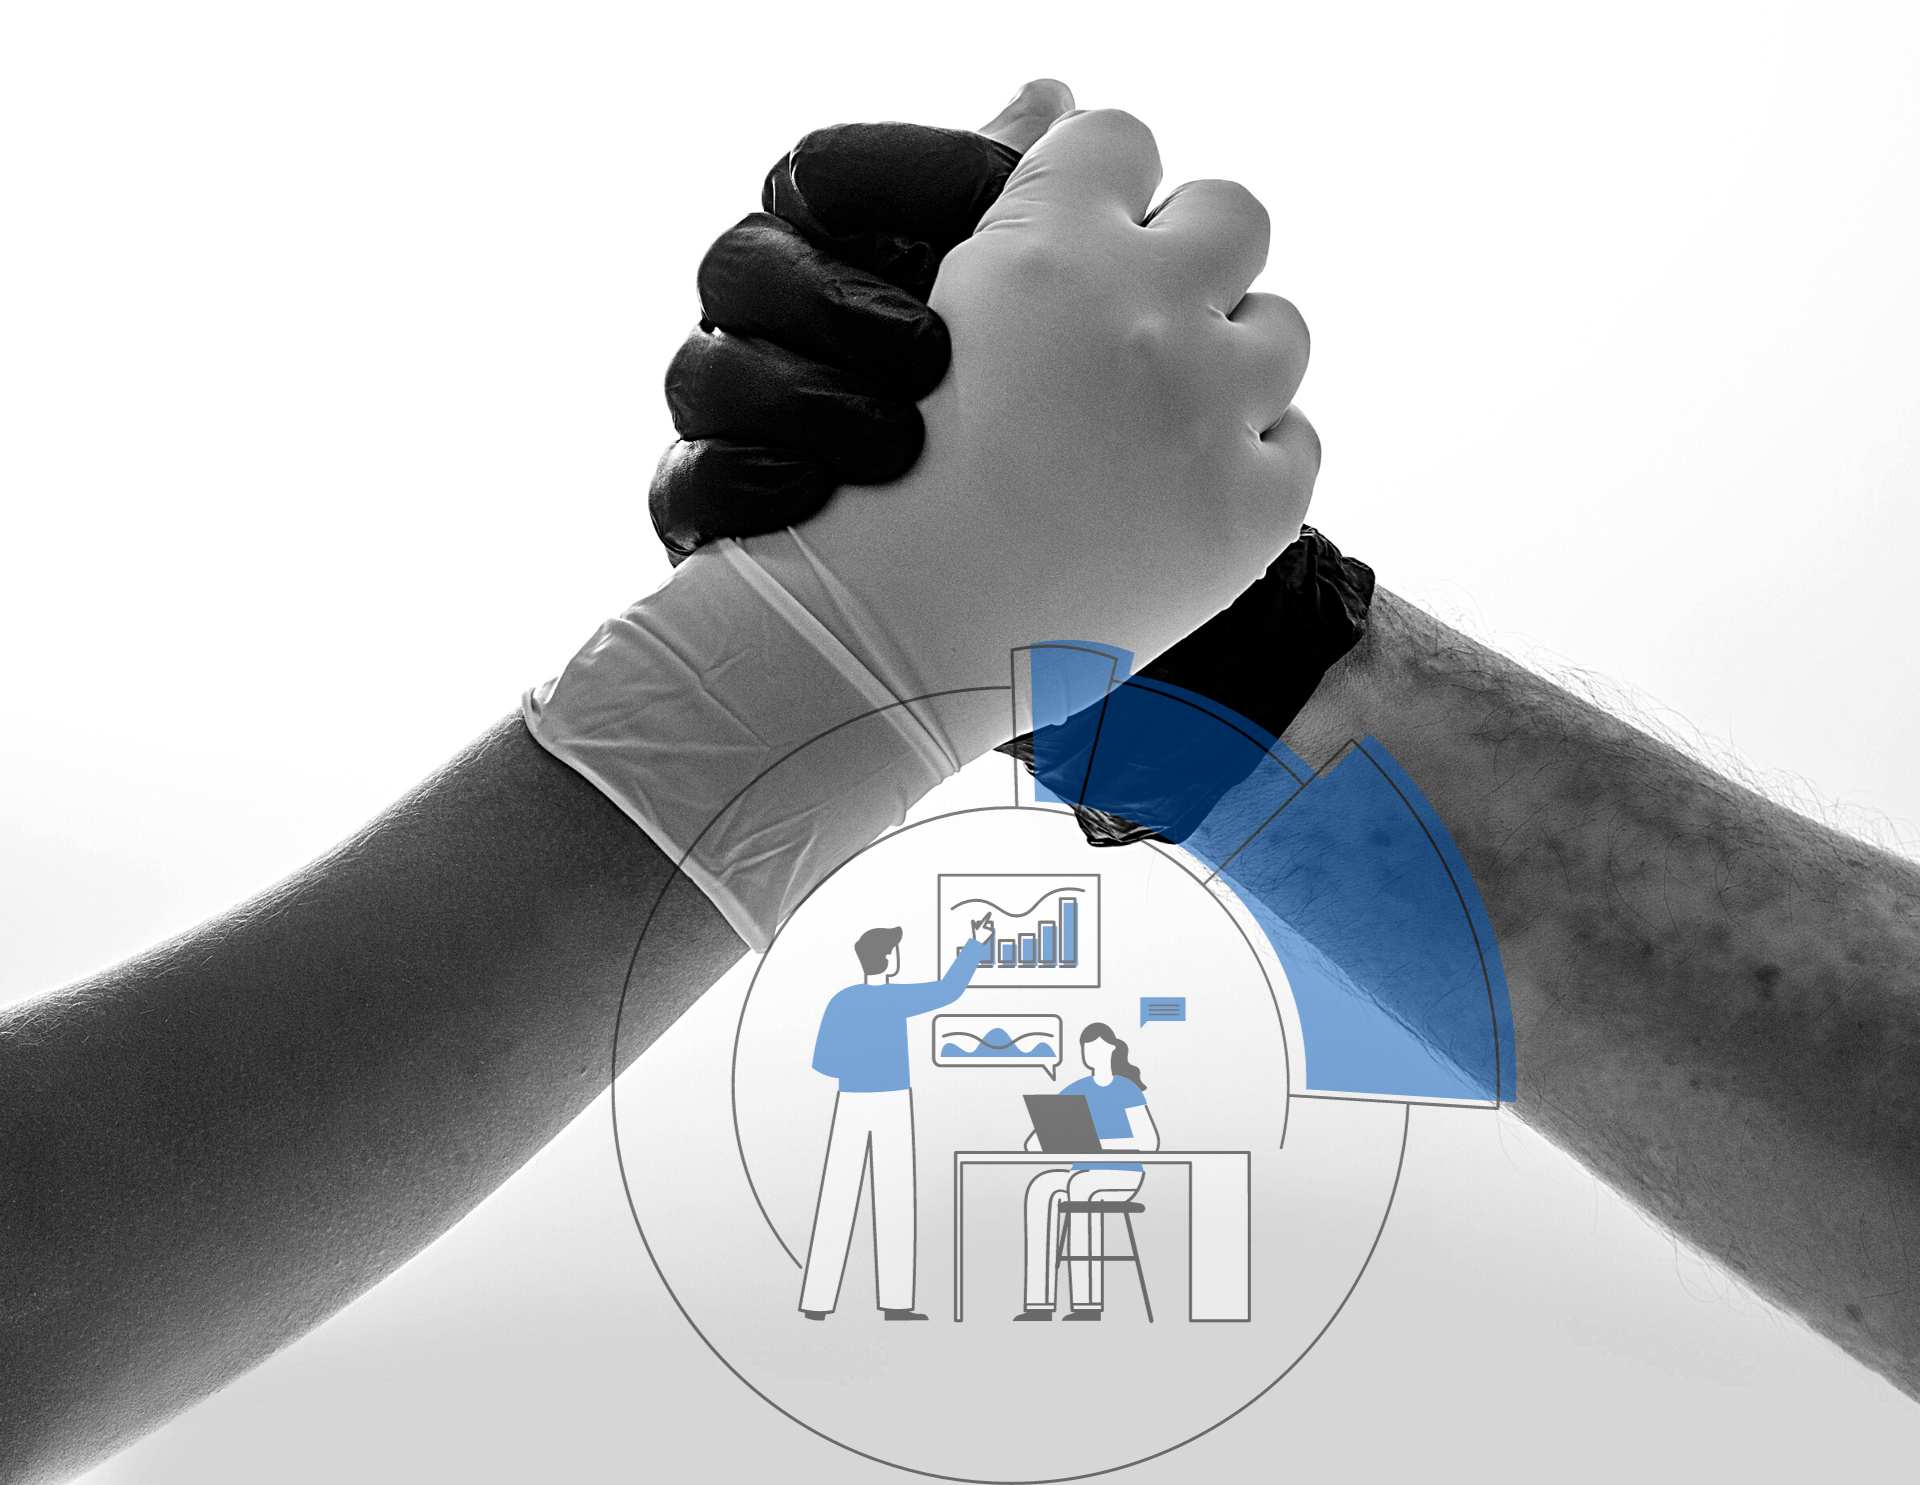 Two hands in medical gloves reach across and grab each other. Underneath the hands there is a blue and black graphic of two individuals writing and looking at a computer